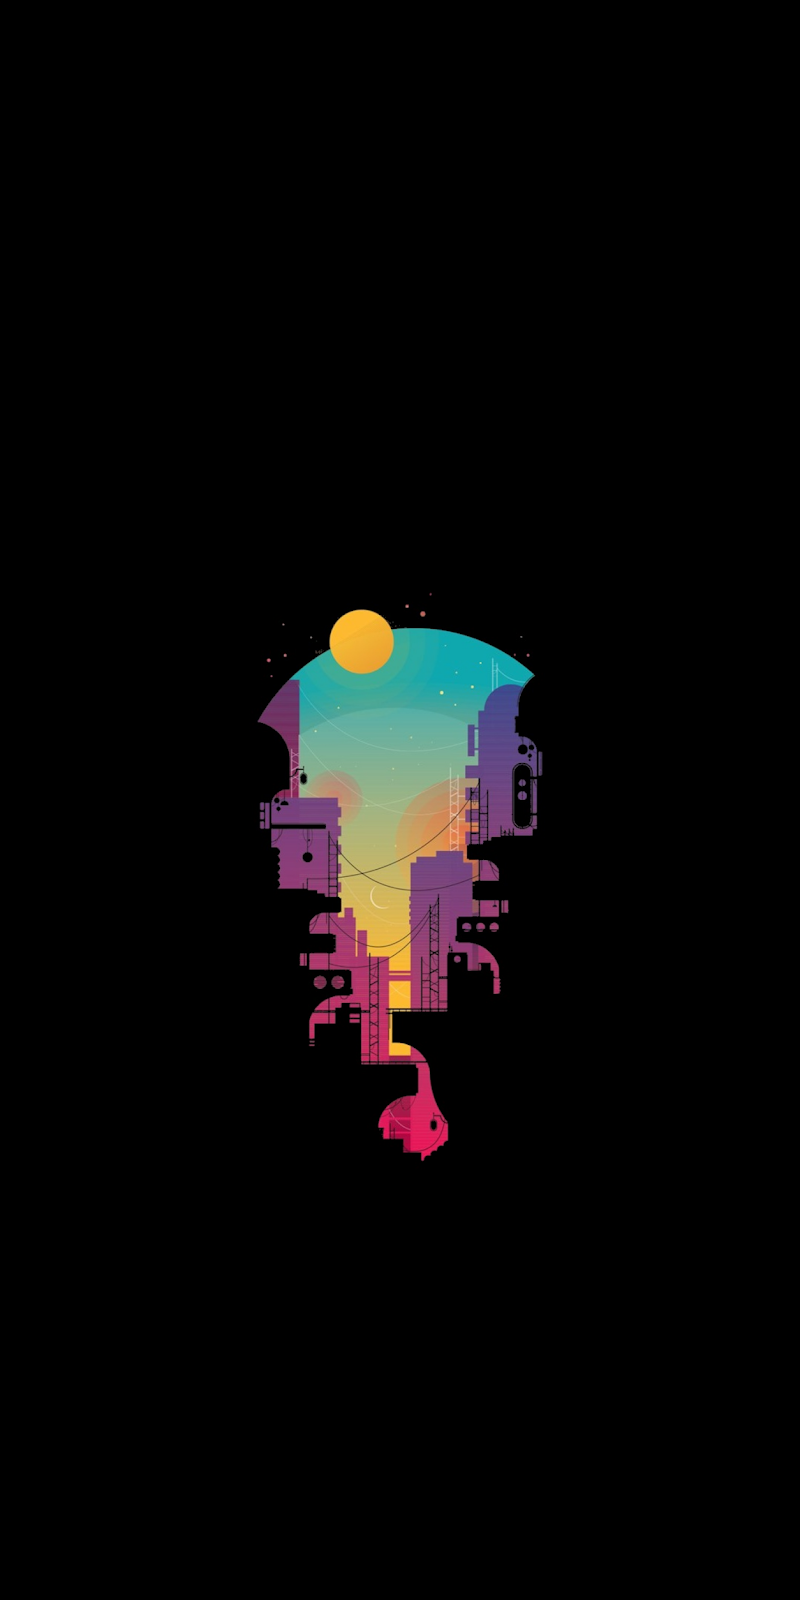 Minimalist City #wallpaper #iphone #android #background. Best iphone wallpaper, Minimalist wallpaper, Background phone wallpaper